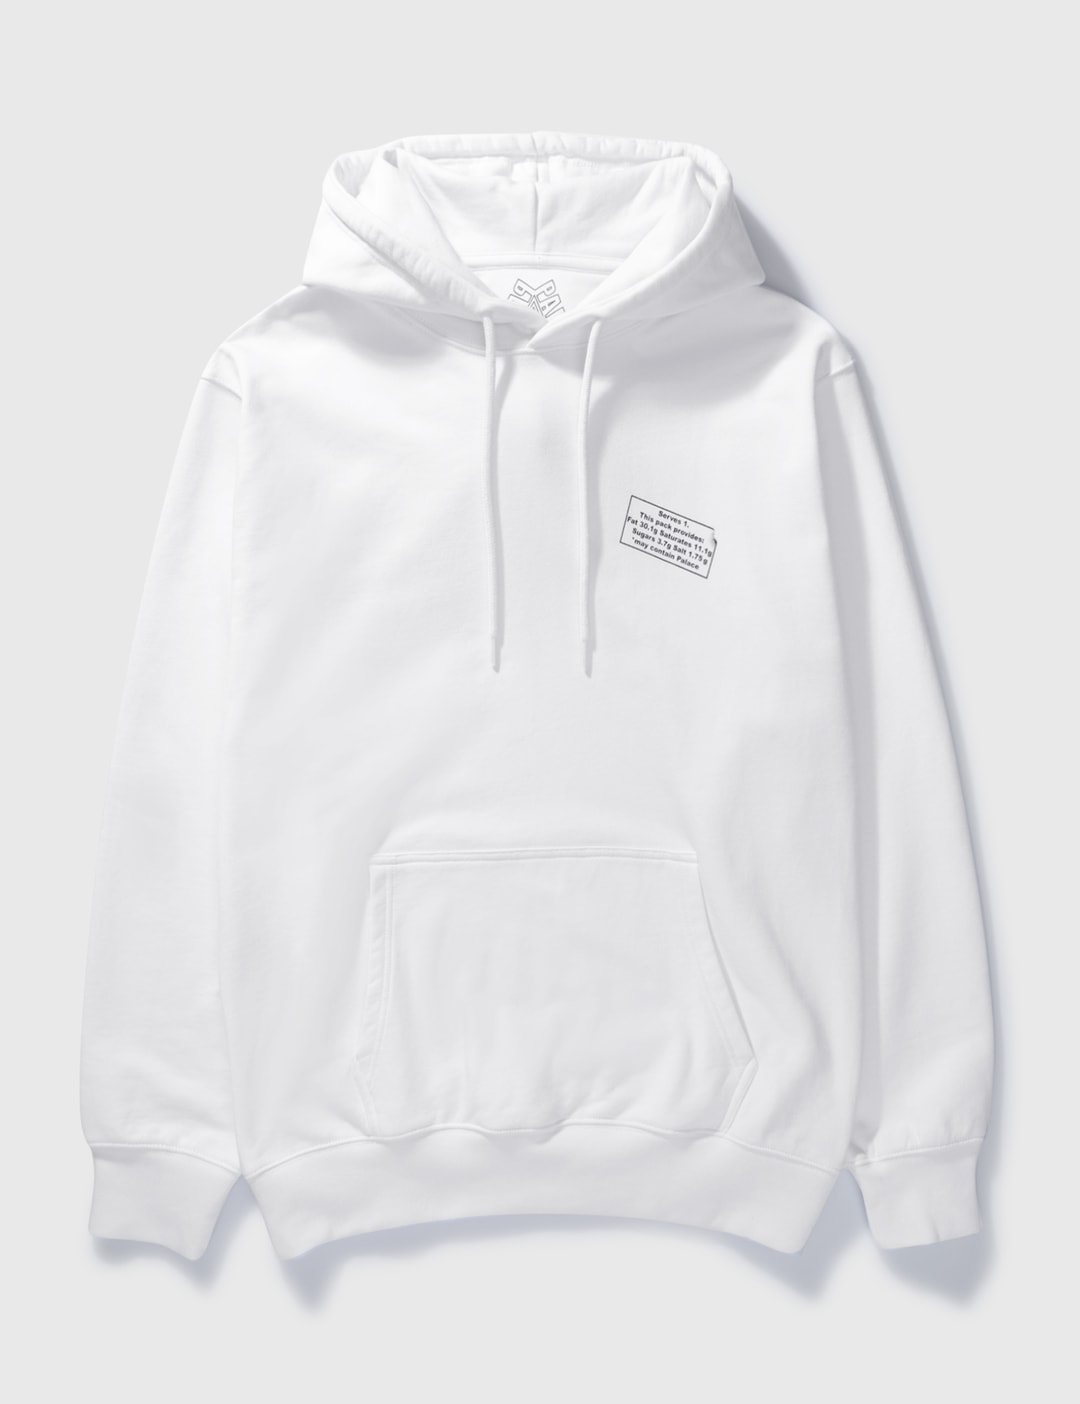 Palace Skateboards Sandwich Hoodie Placeholder Image